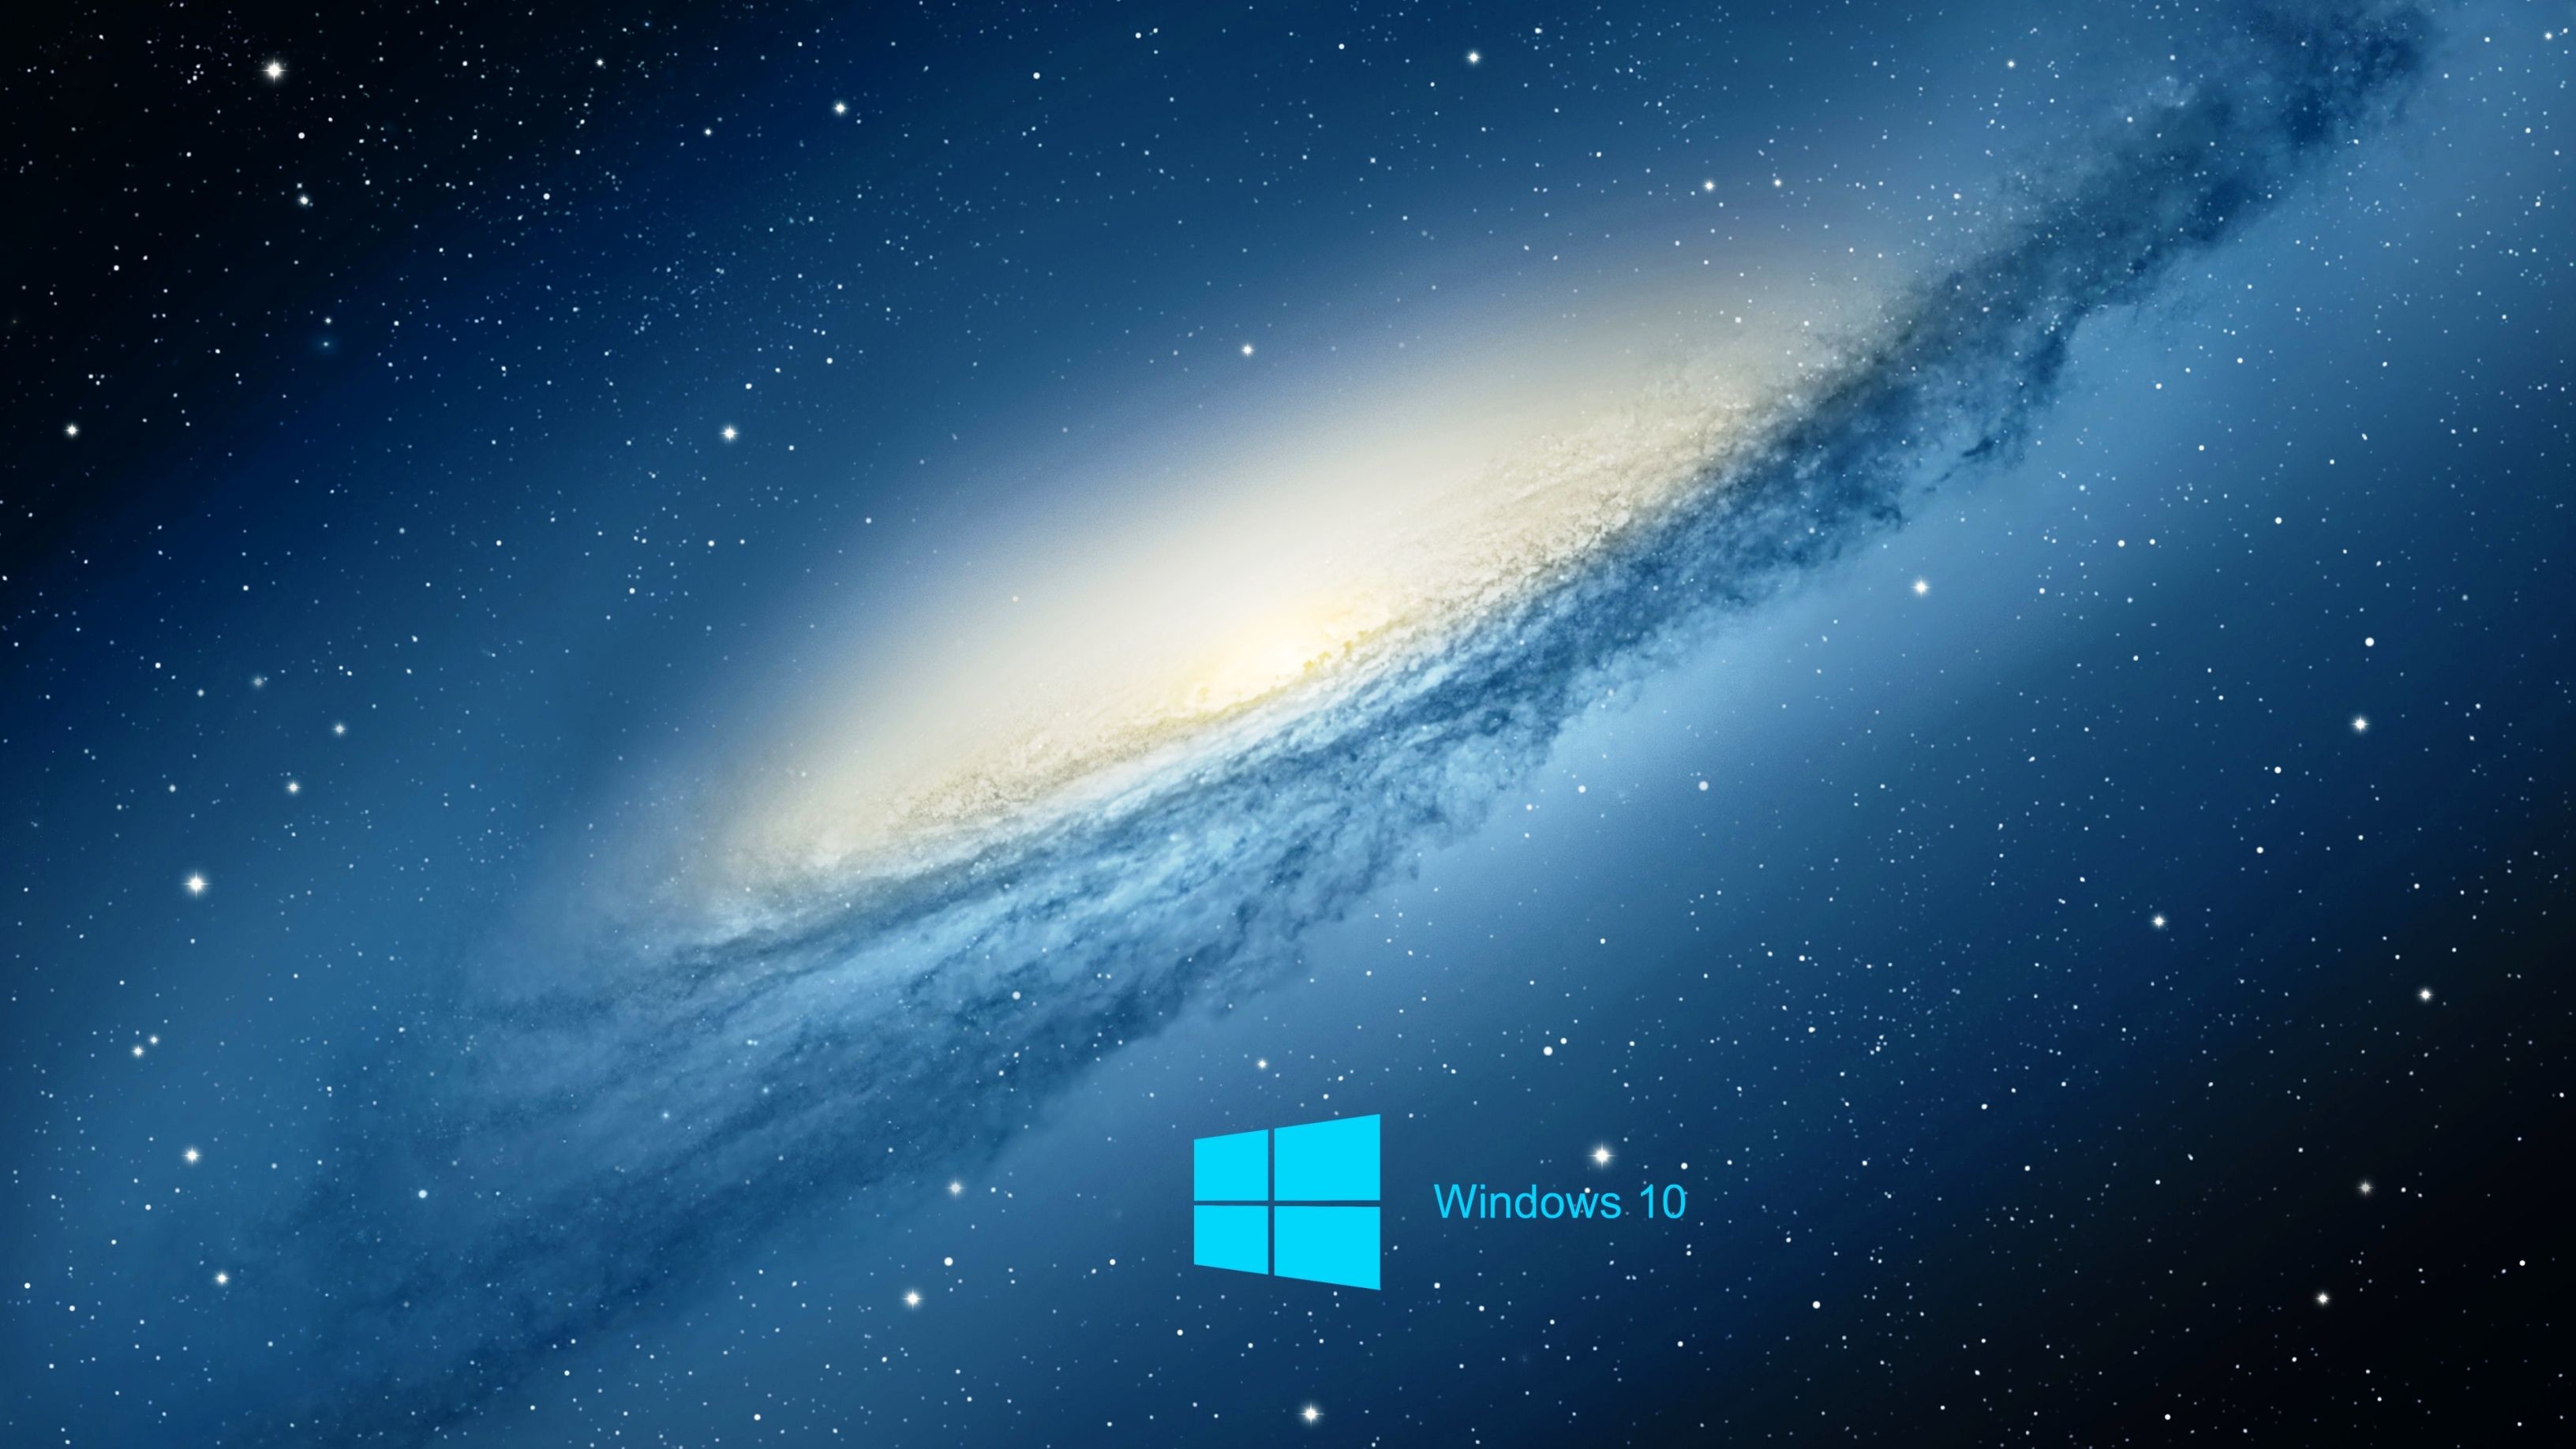 3264x1836 3840x2160 4k Windows 10 Wallpapers High Quality | Download Free">